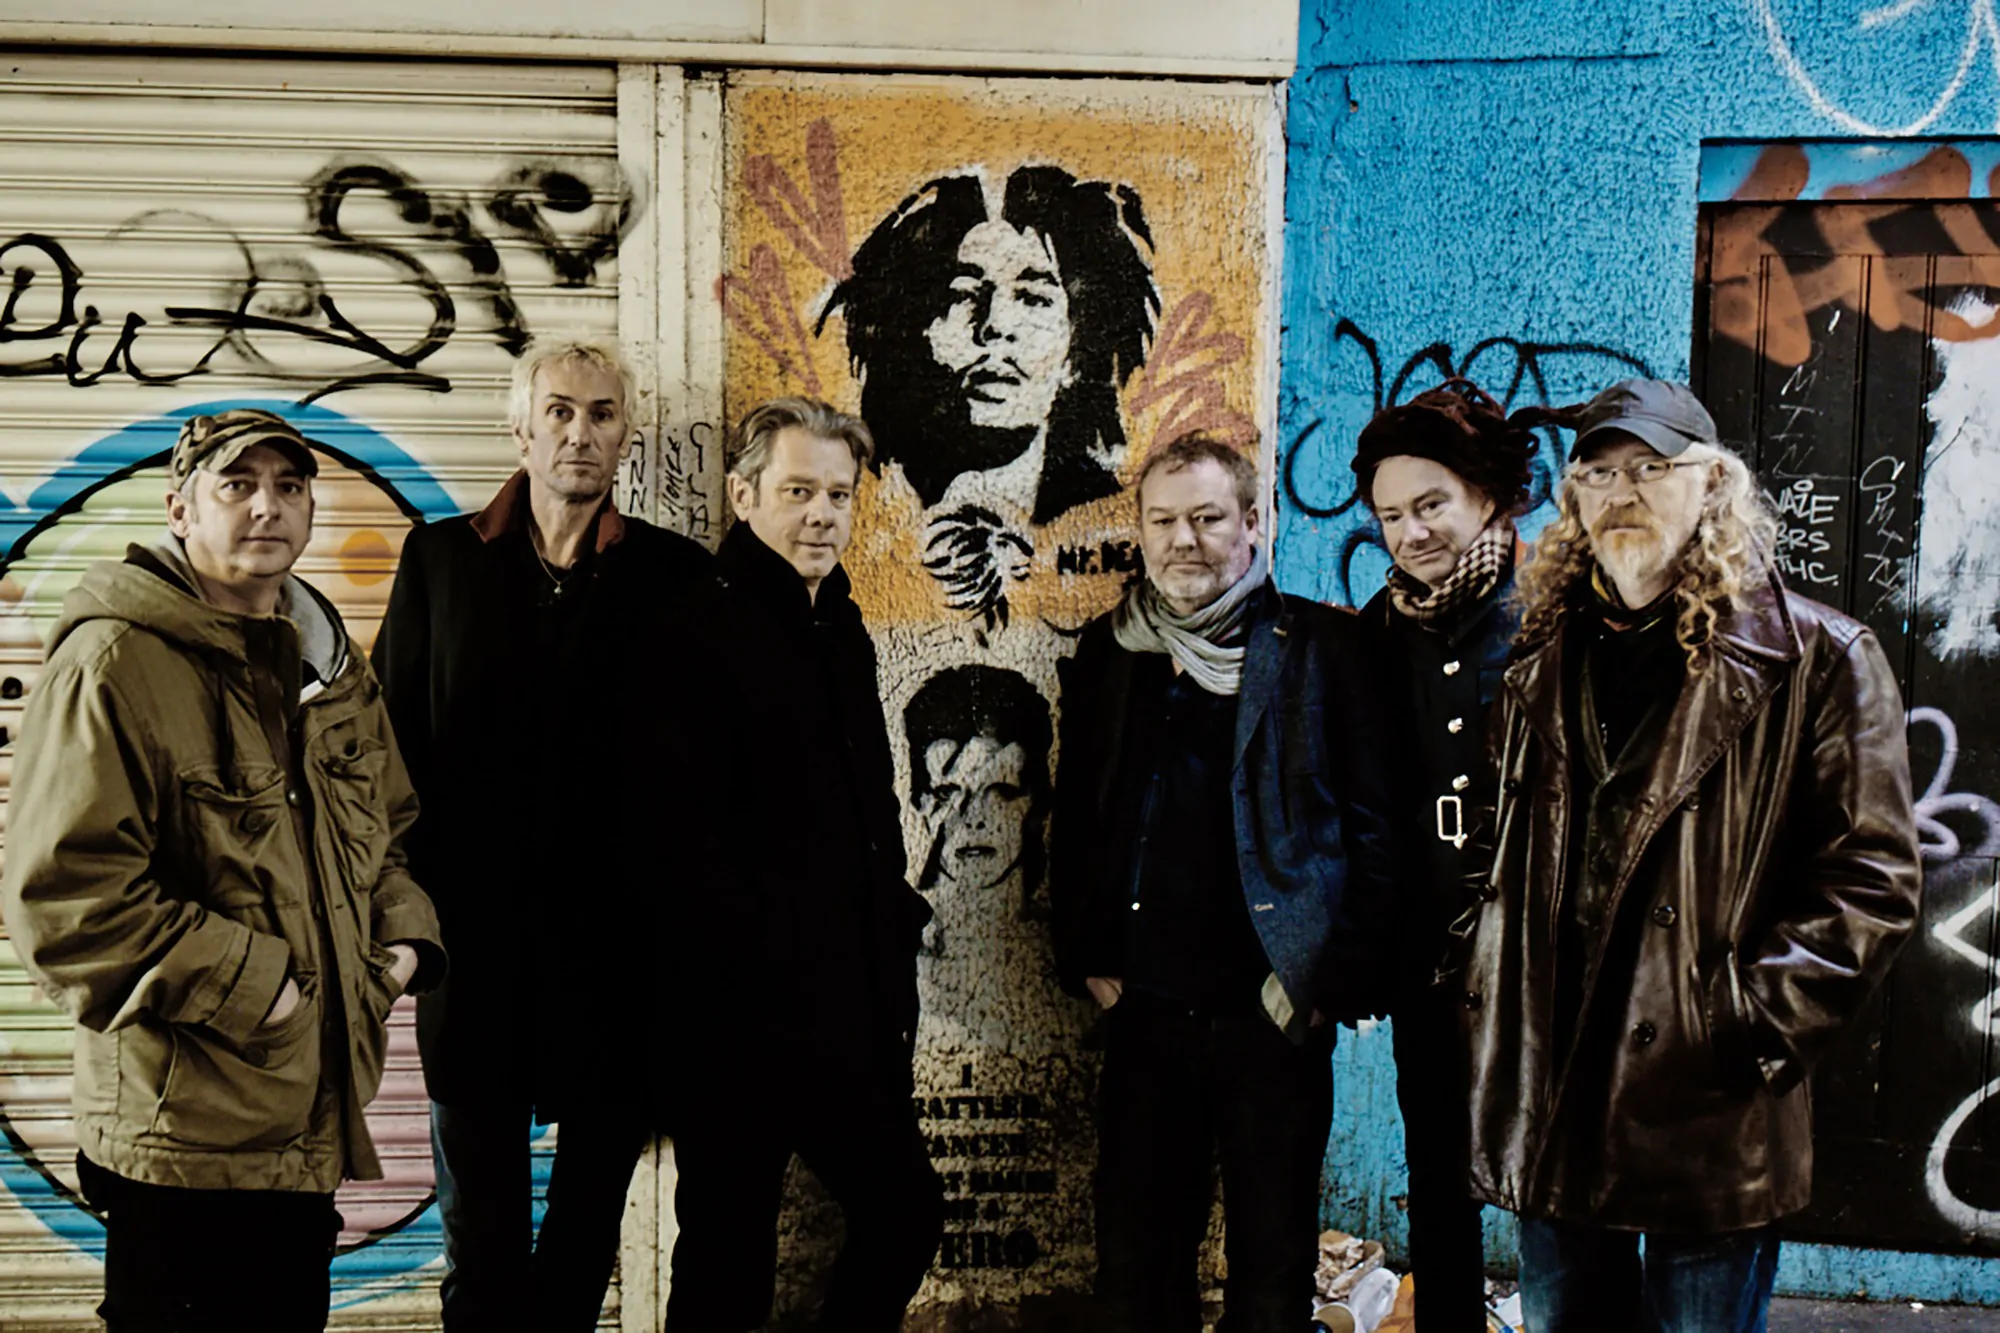 THE LEVELLERS release new track ‘Burning Hate Like Fire’ – Watch Video